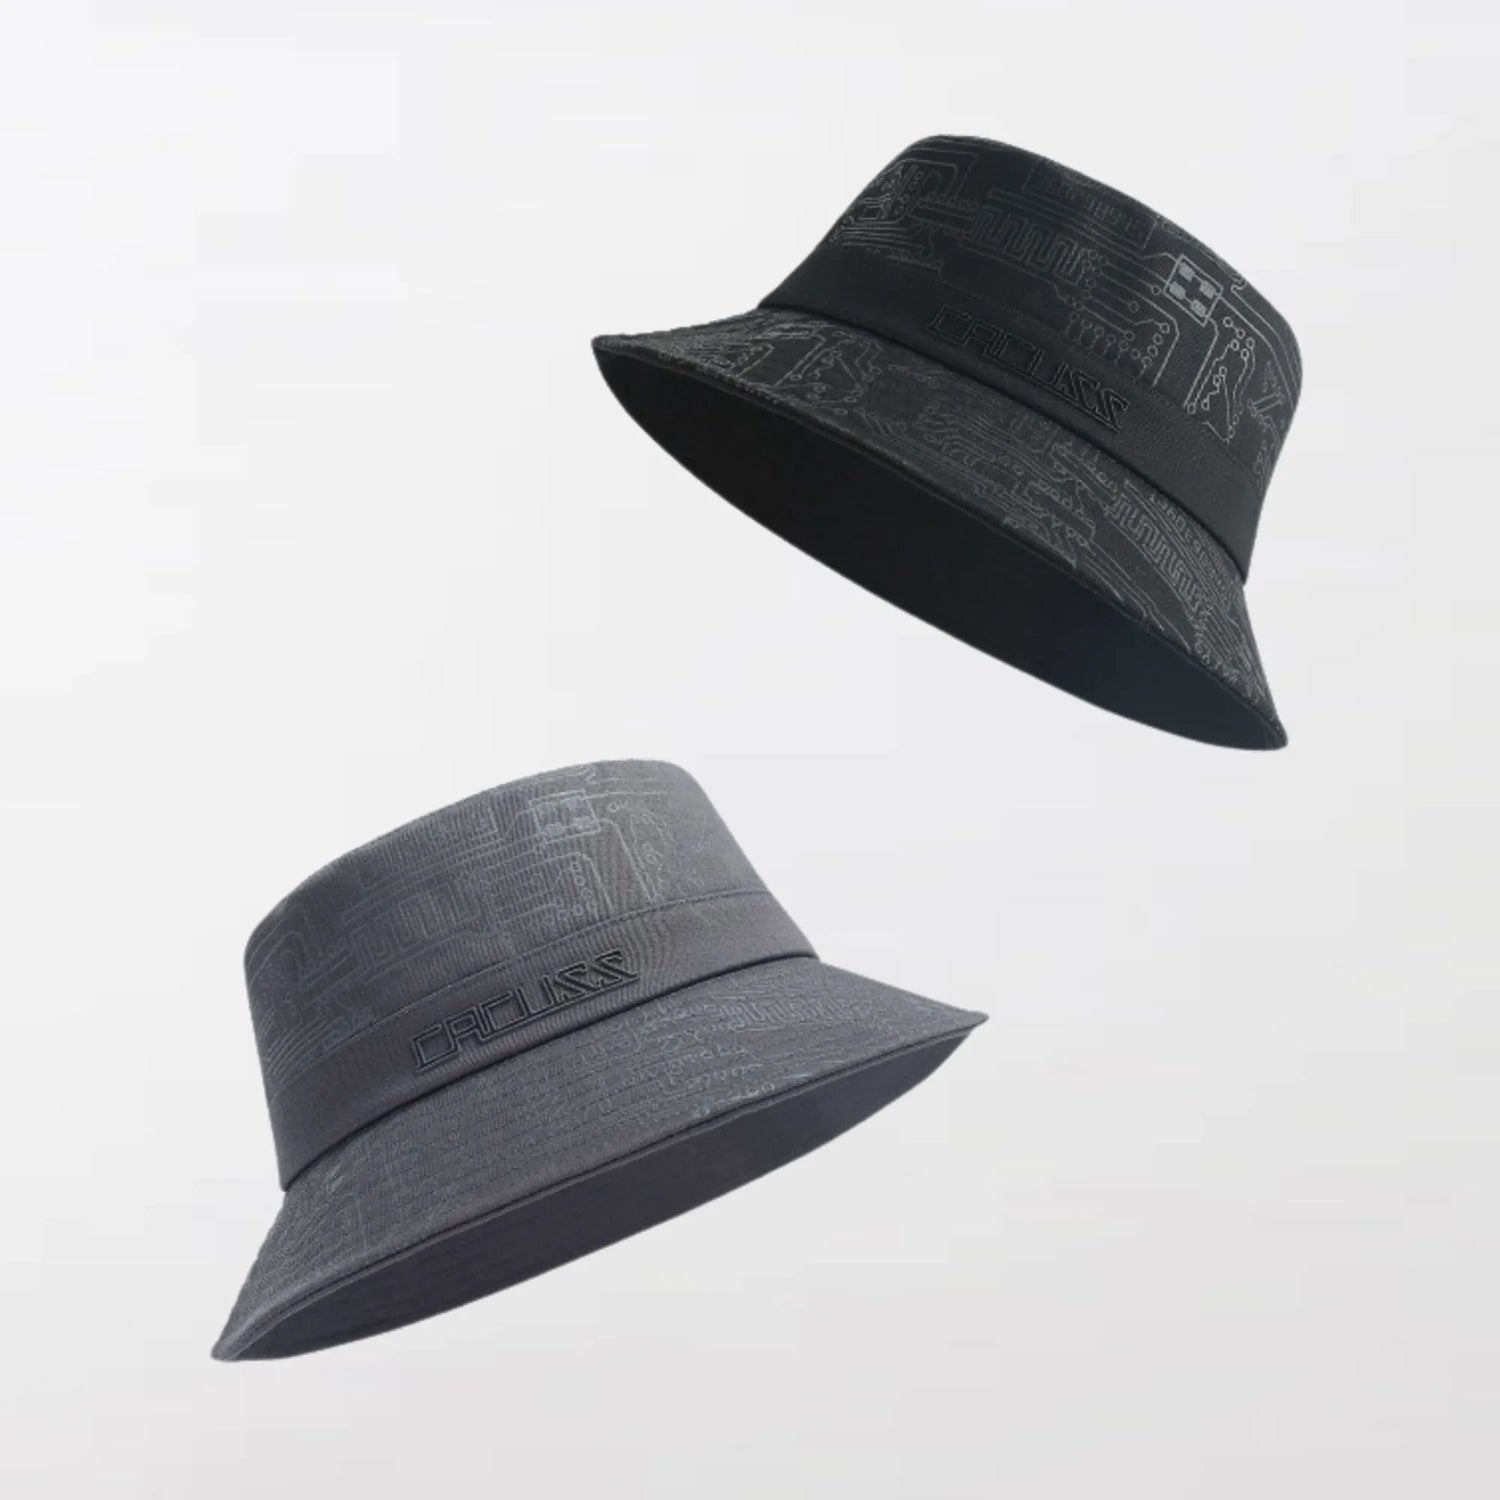 A black and gray Cyberpunk Bucket Hat with a three-dimensional shape, nearly routed brim - Clotechnow.